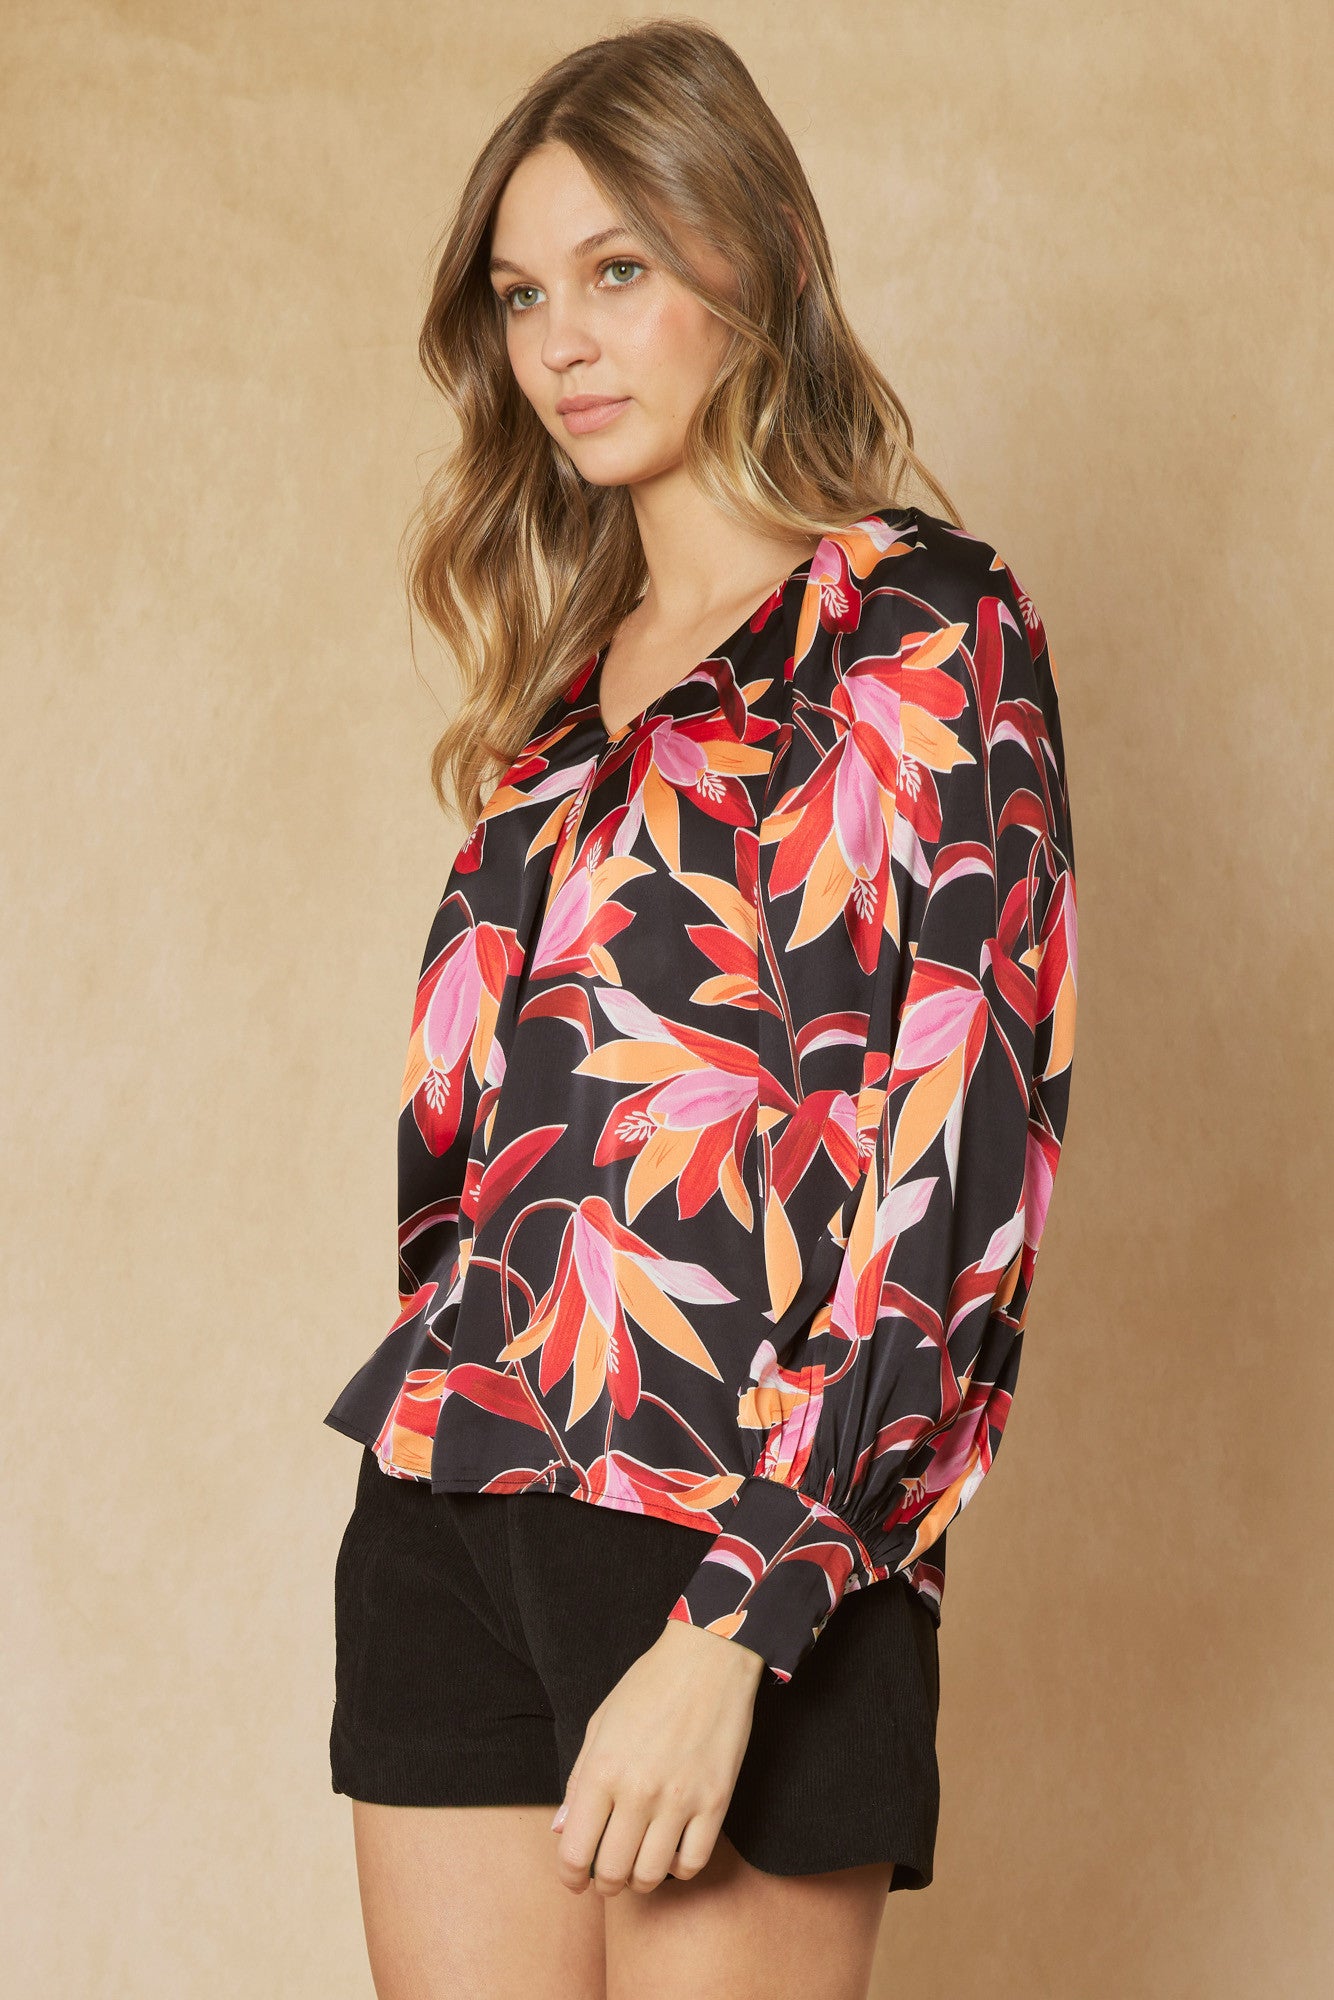 Entro Lily Top - Black, floral print, long sleeves, v-neck, button sleeves, curvy